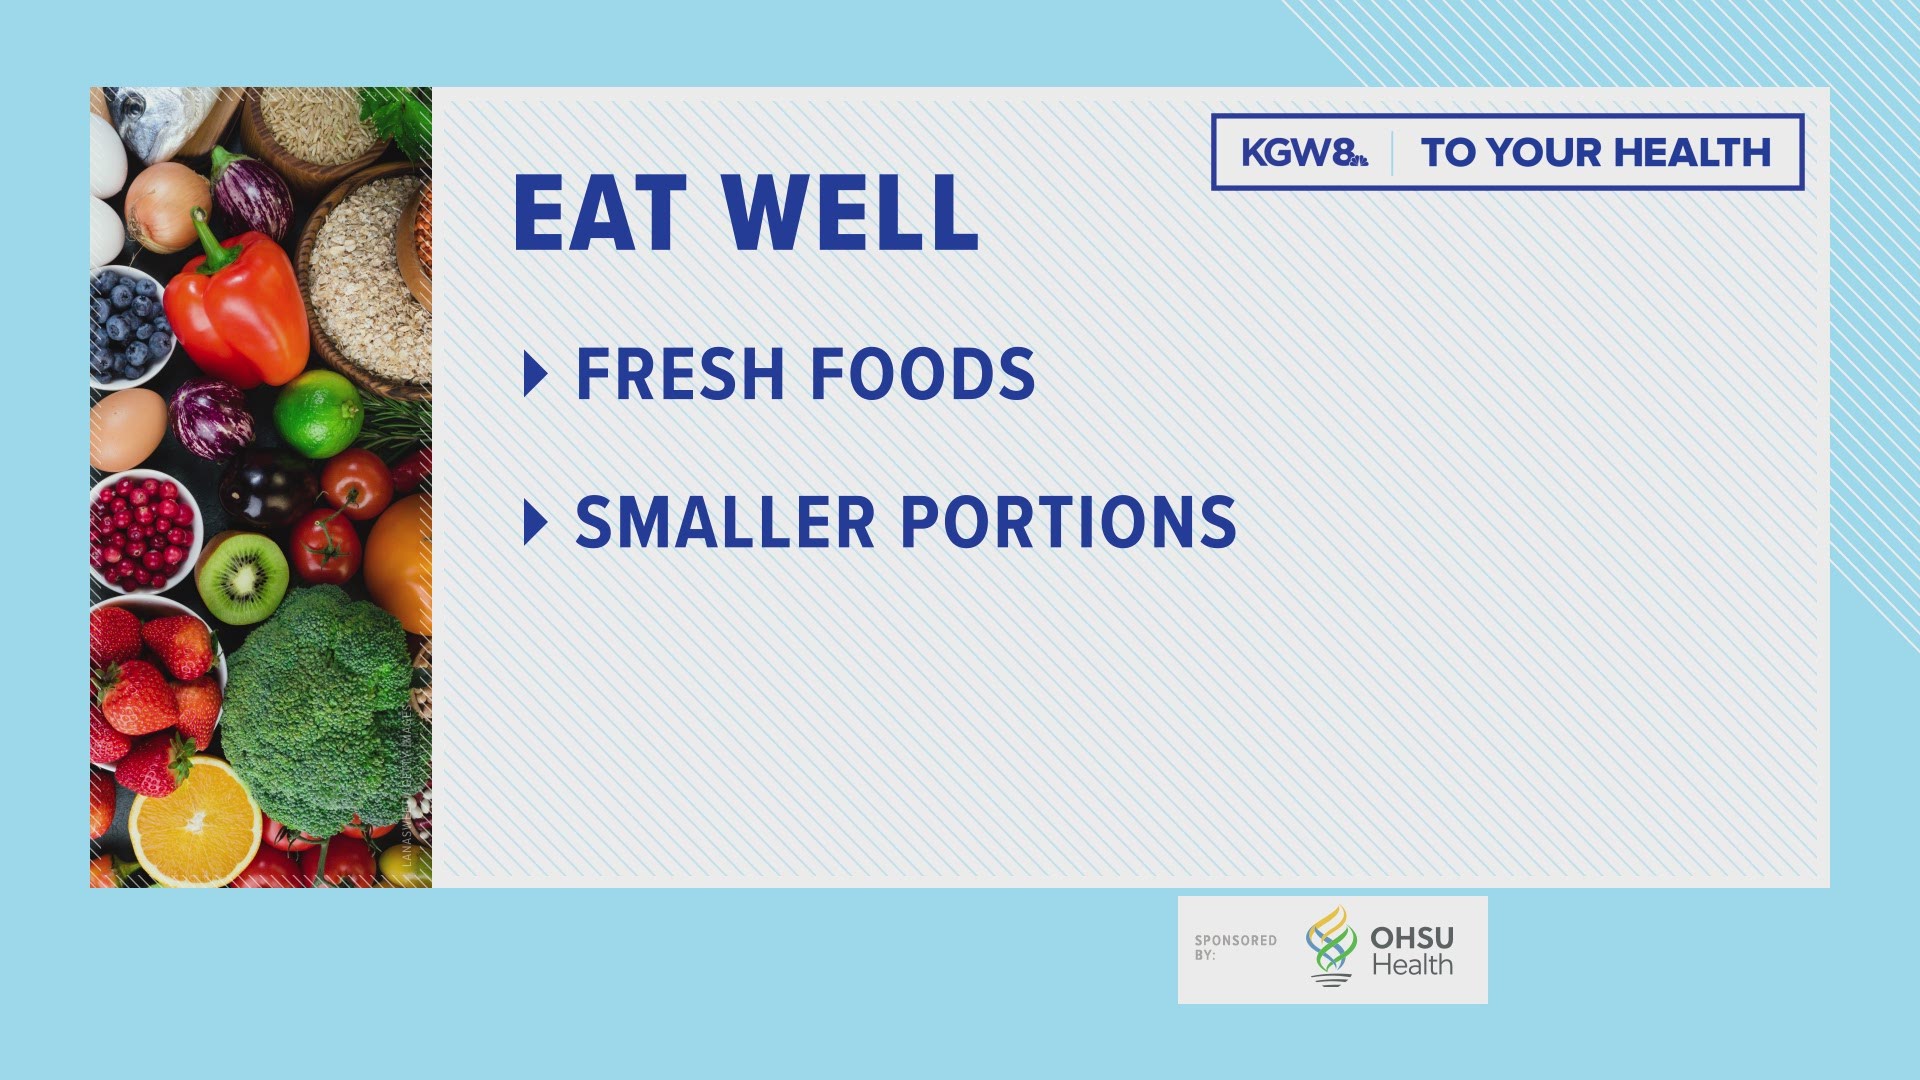 From OHSU Health, here are three ways to eat well this year.